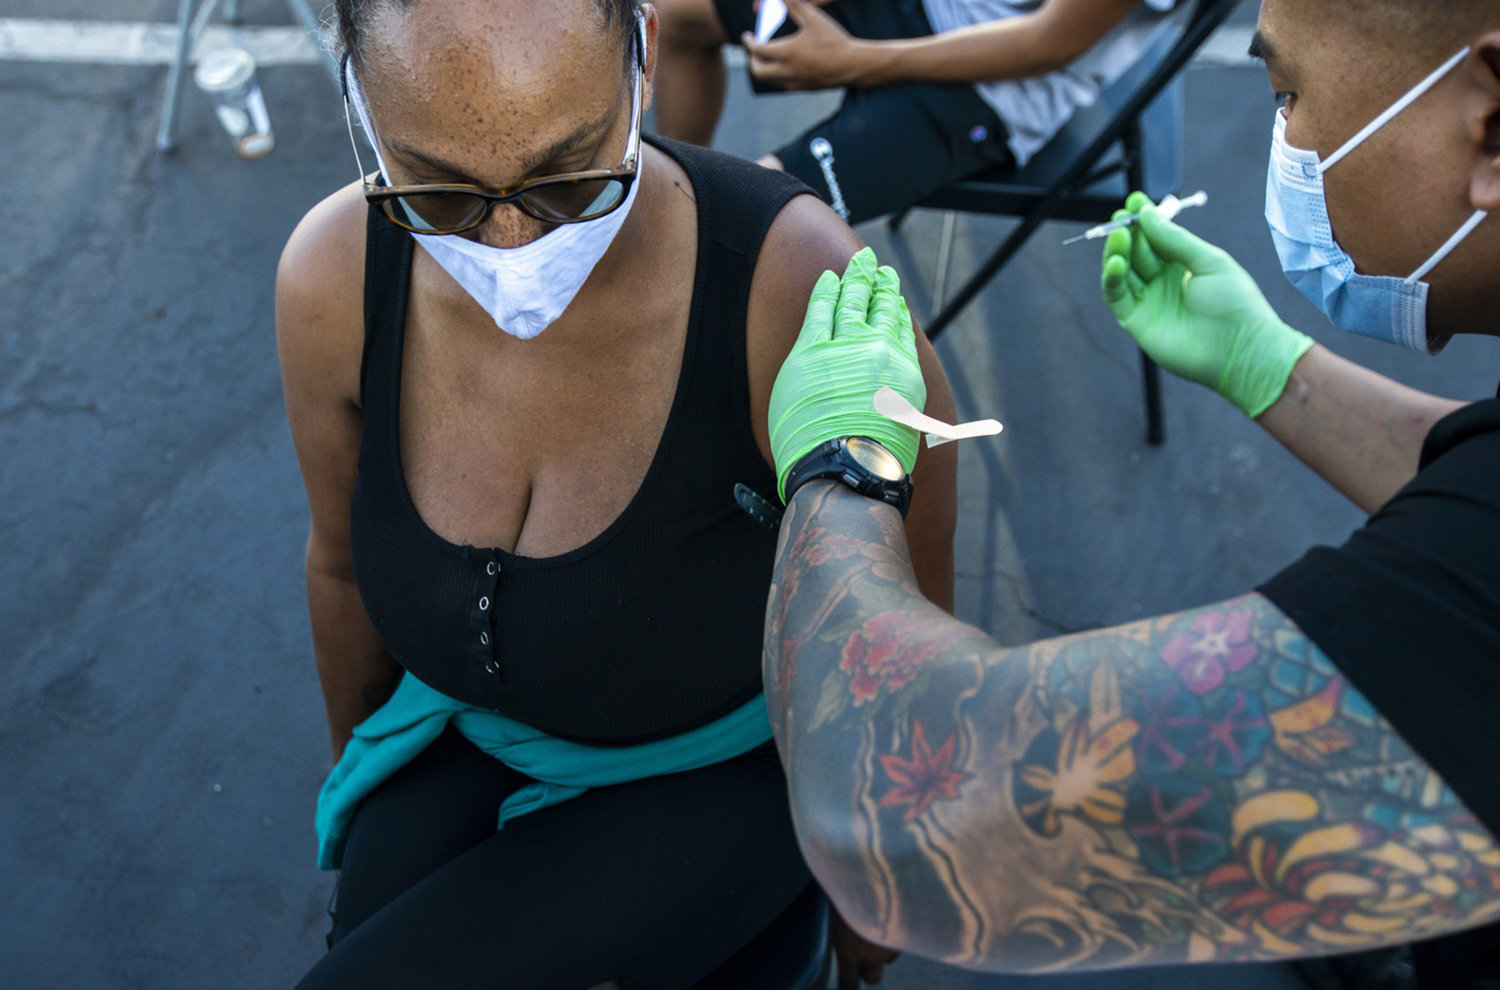 Tamara Pitman, 44, left, of Long Beach is vaccinated by Marc Ocampo, right, on Tuesday, July 6, 2021 in Long Beach, California.